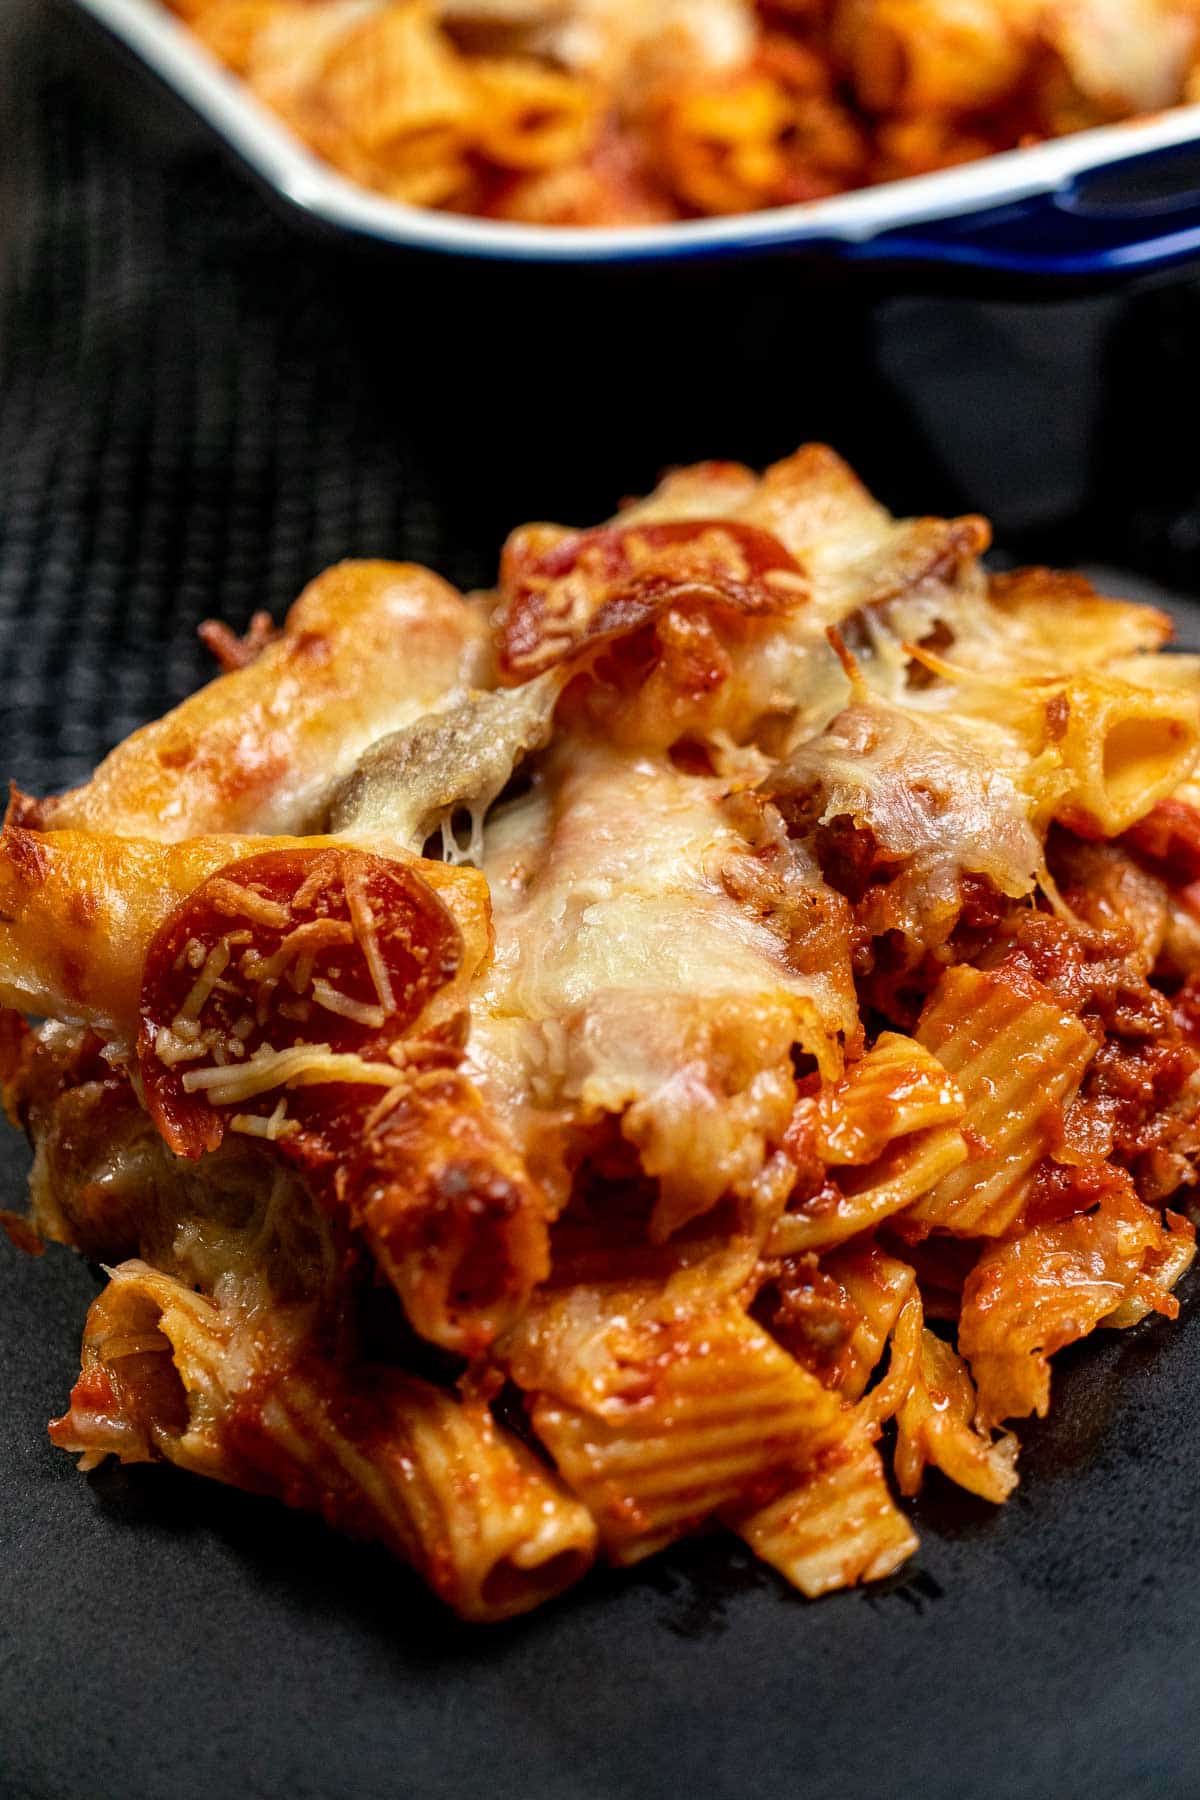 Large portion of baked rigatoni filled with sausage and meatballs on a black plate.